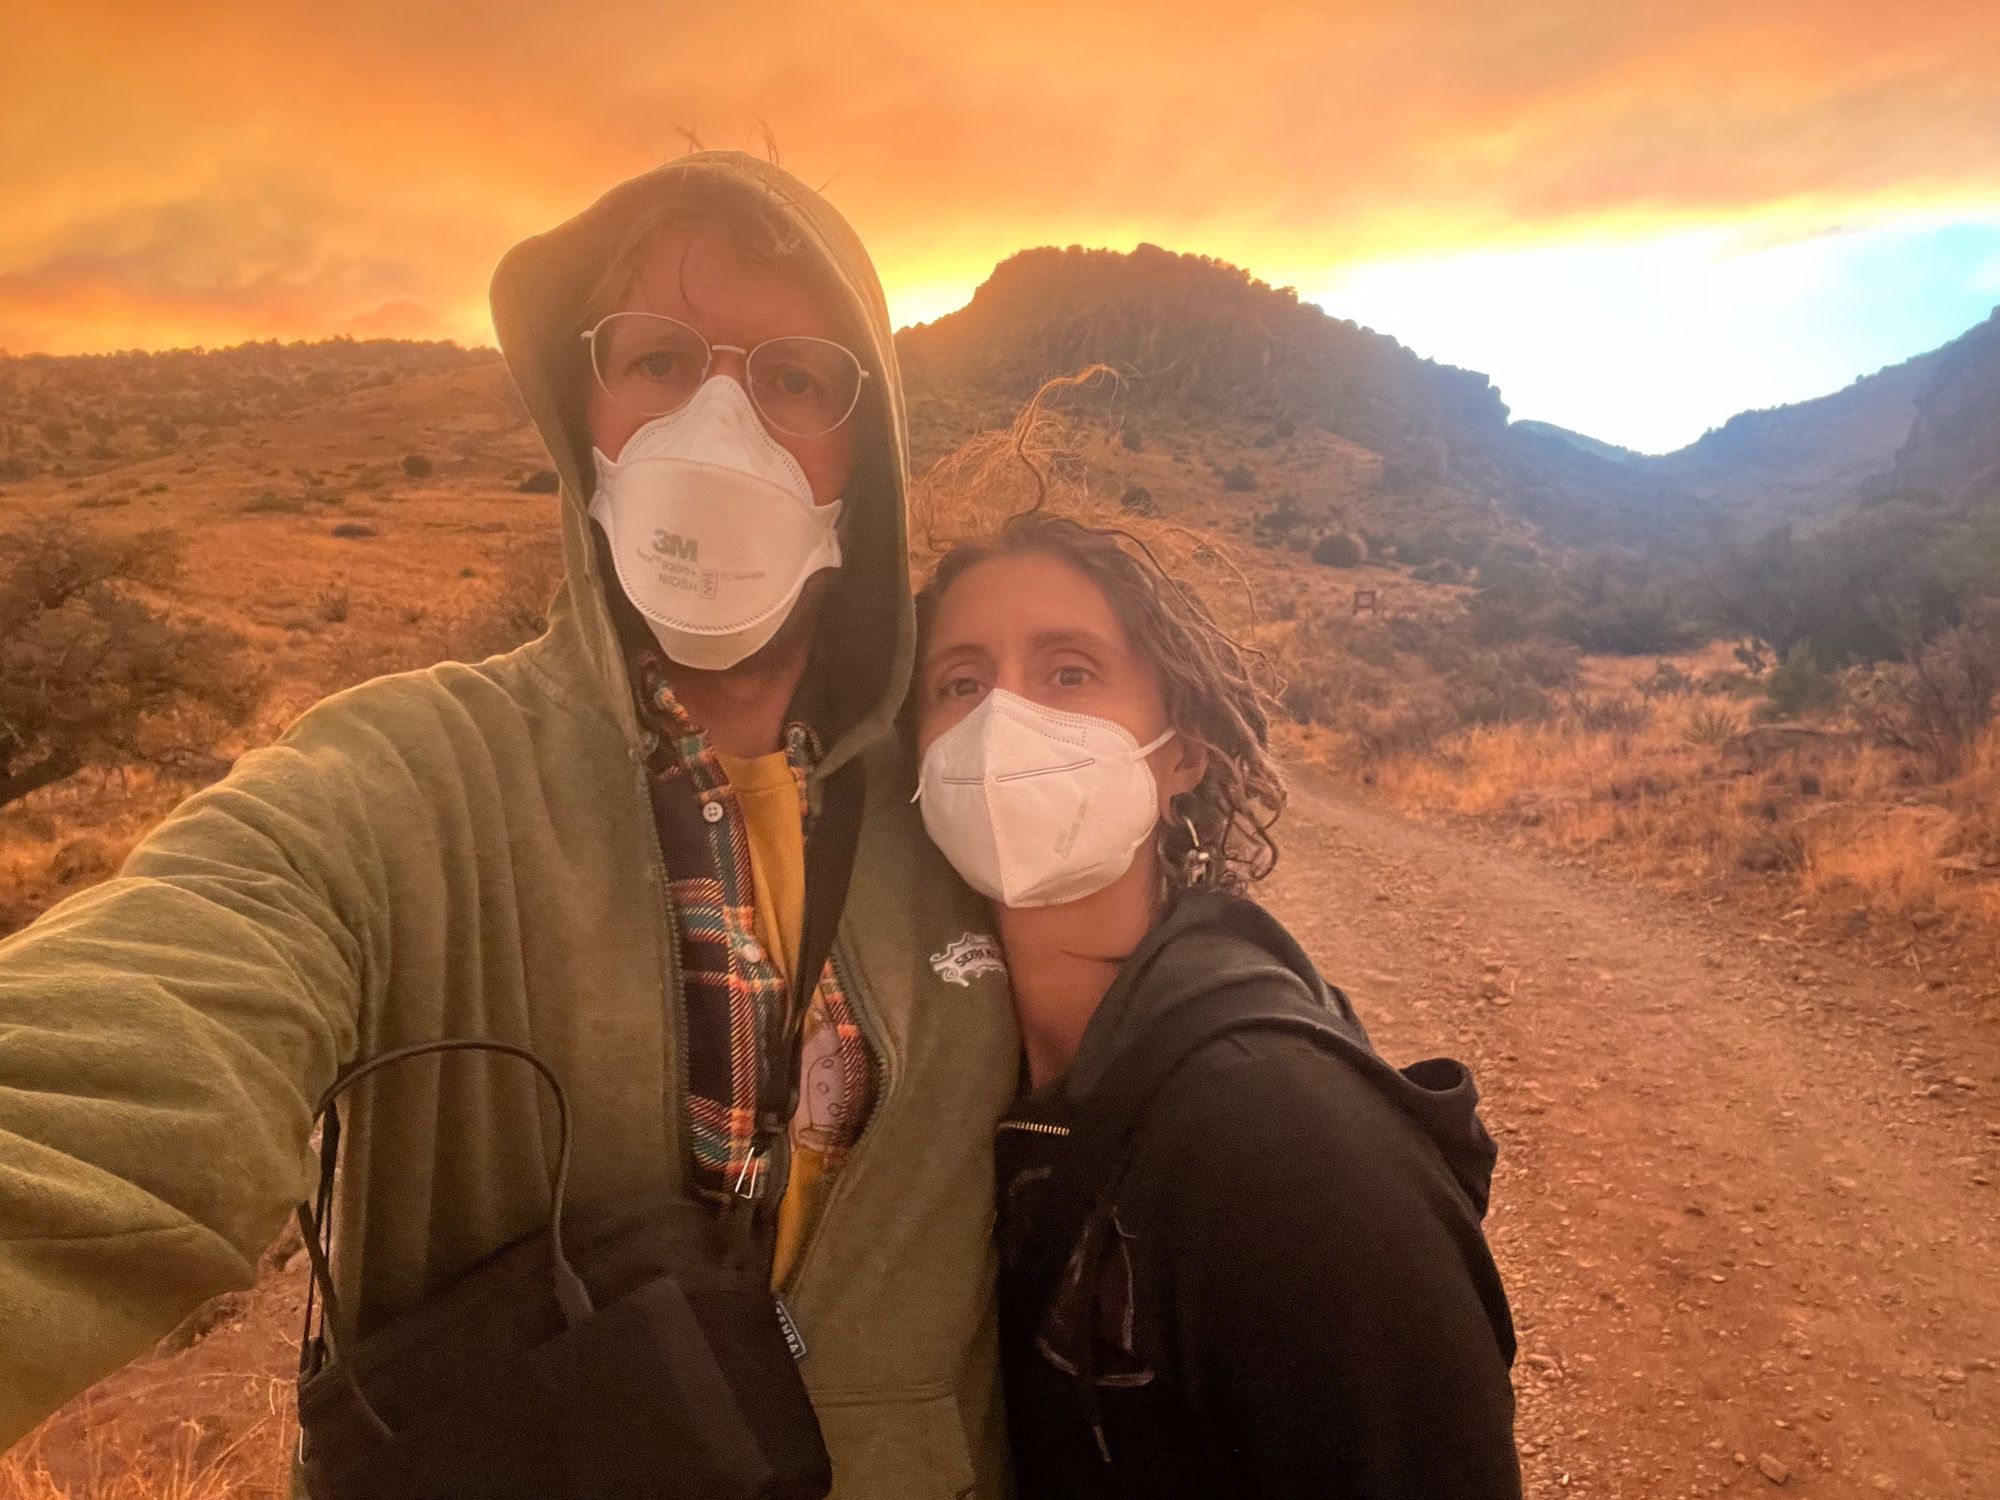 A man and woman stand on a dirt road wearing white facemarks, behind is a smoky red orange sunset